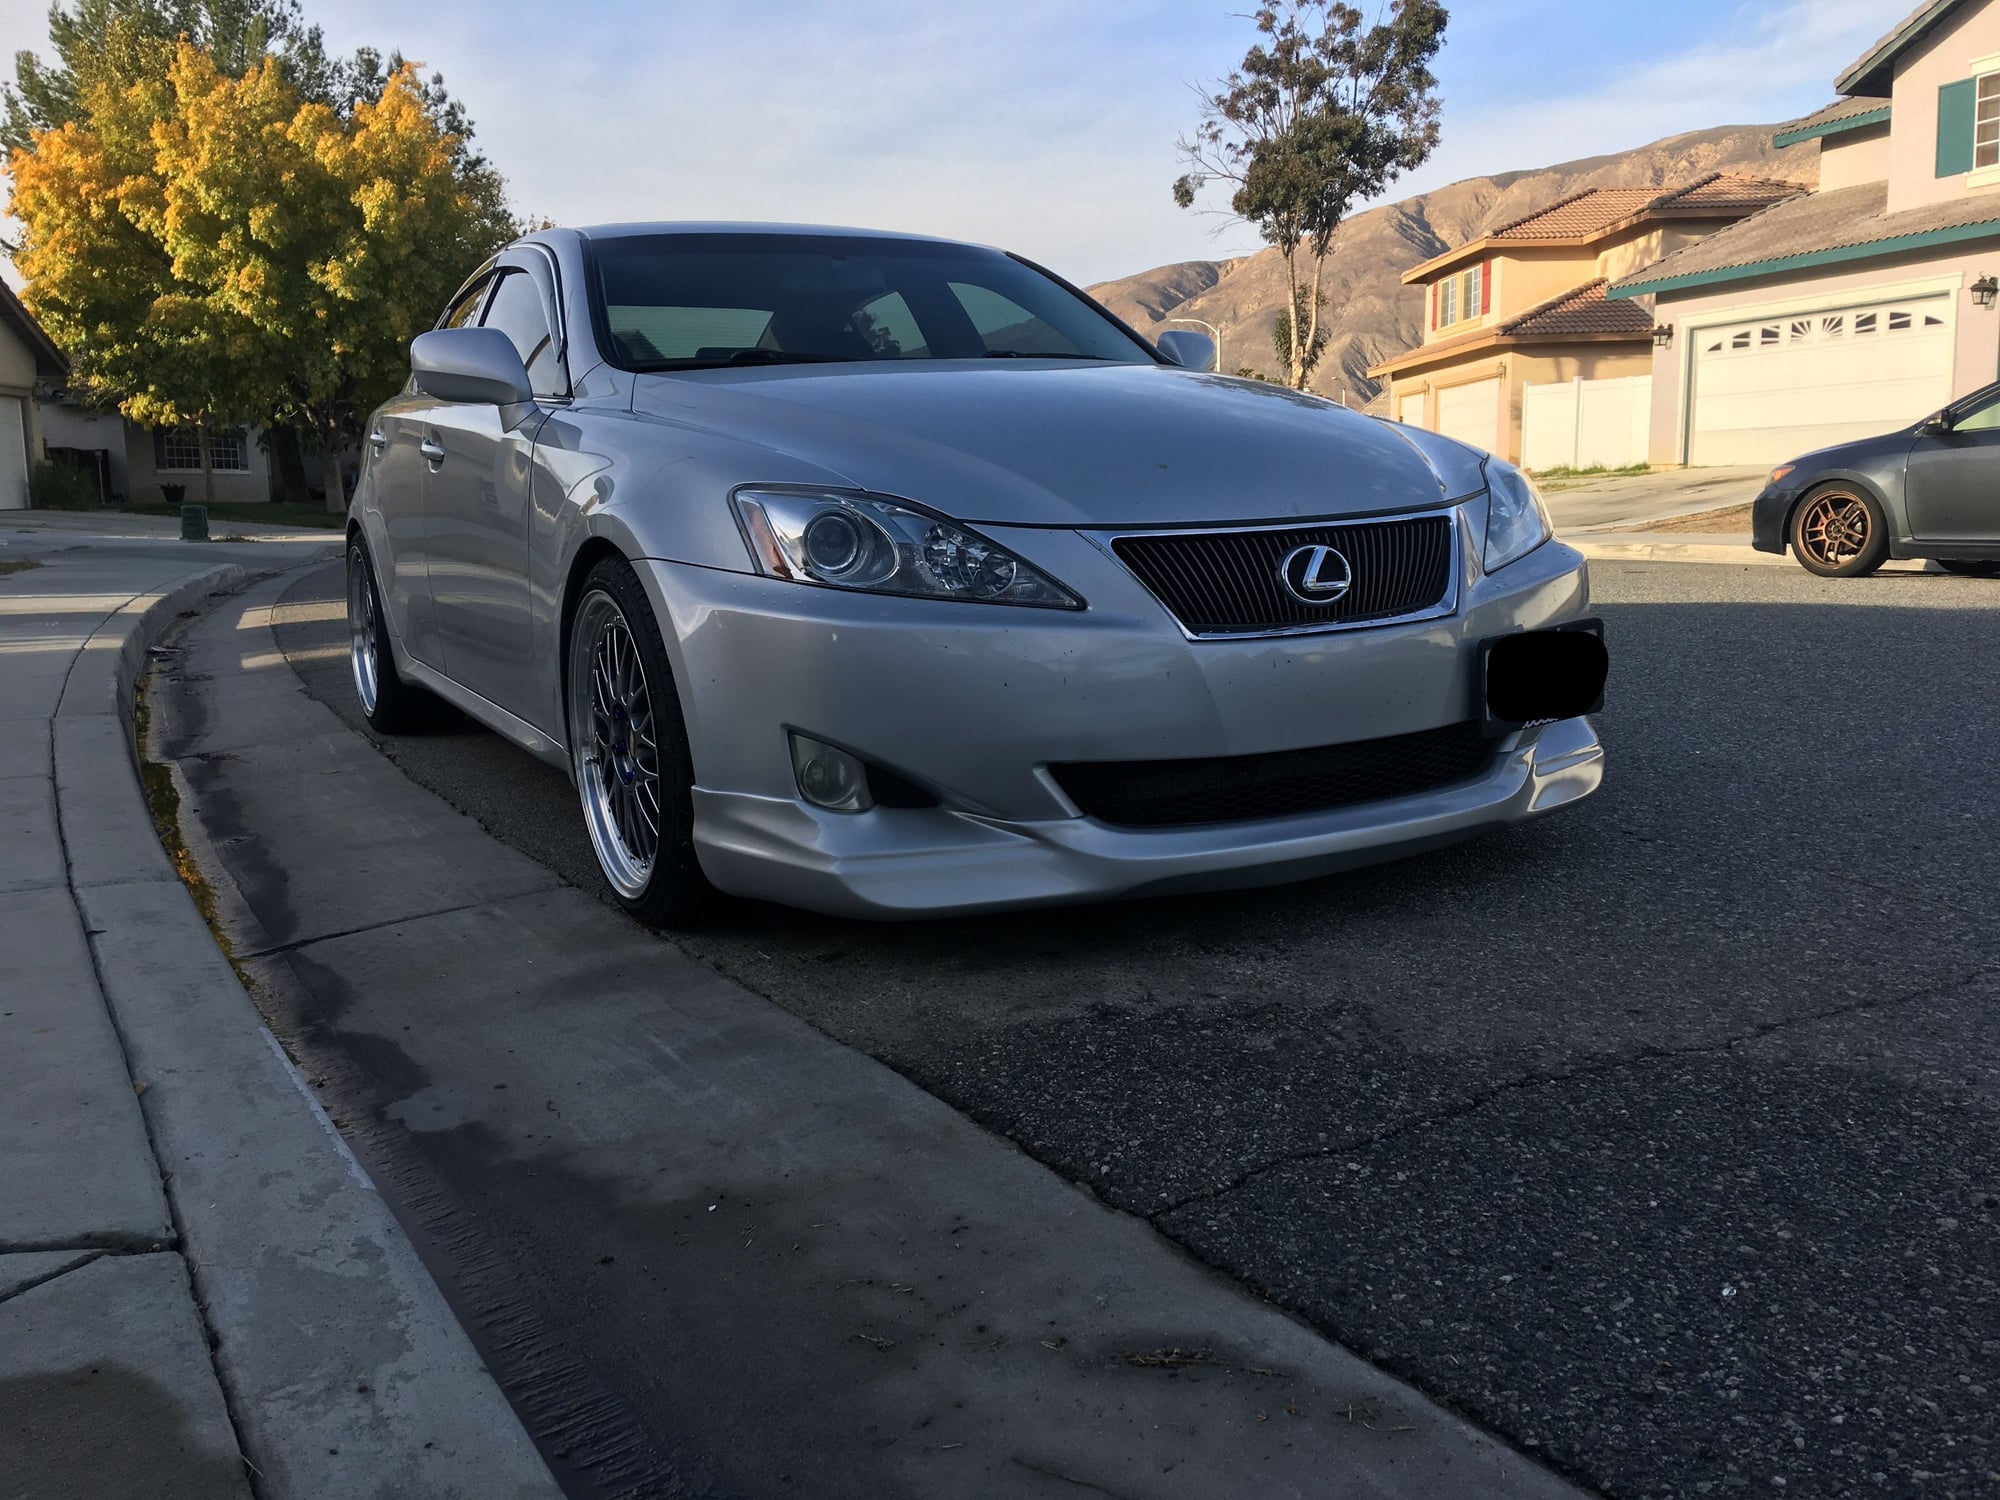 Exterior Body Parts - 06-08 IS350 Authentic INGS front Lip - Used - 2006 to 2008 Lexus IS350 - San Jacinto, CA 92583, United States